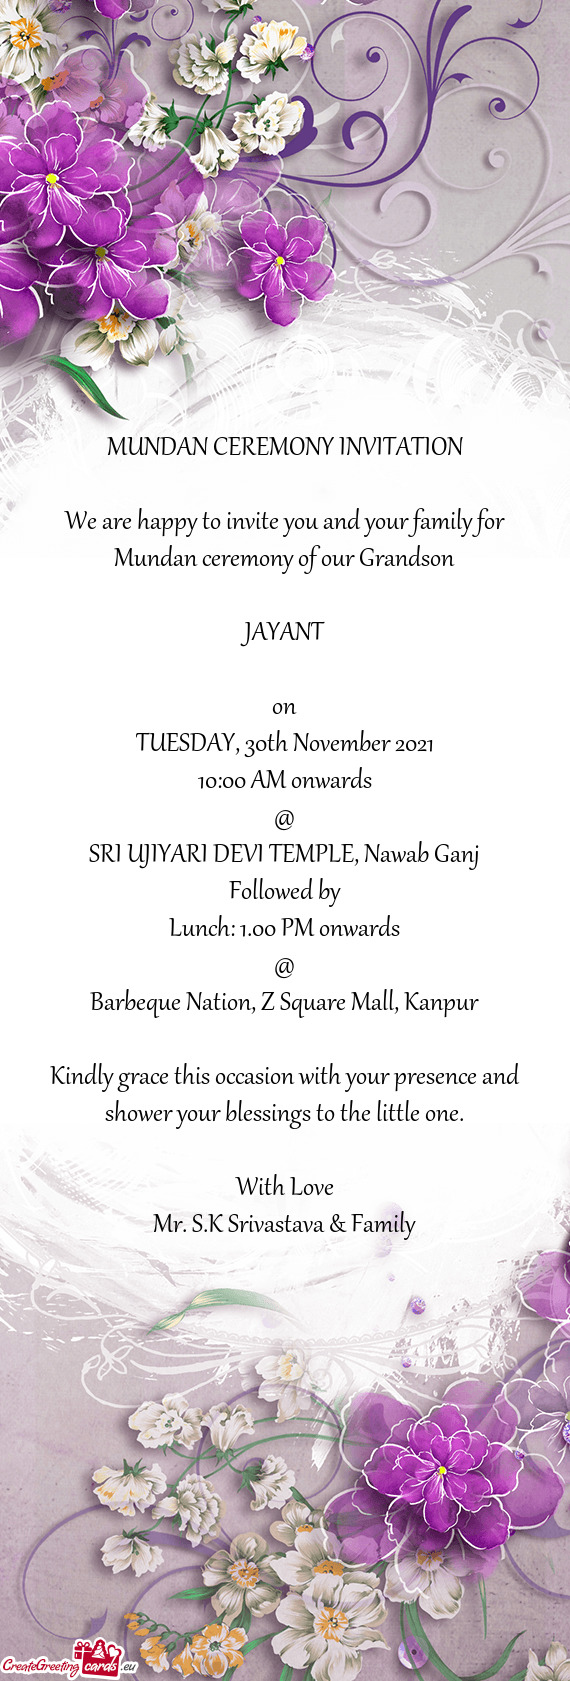 We are happy to invite you and your family for Mundan ceremony of our Grandson